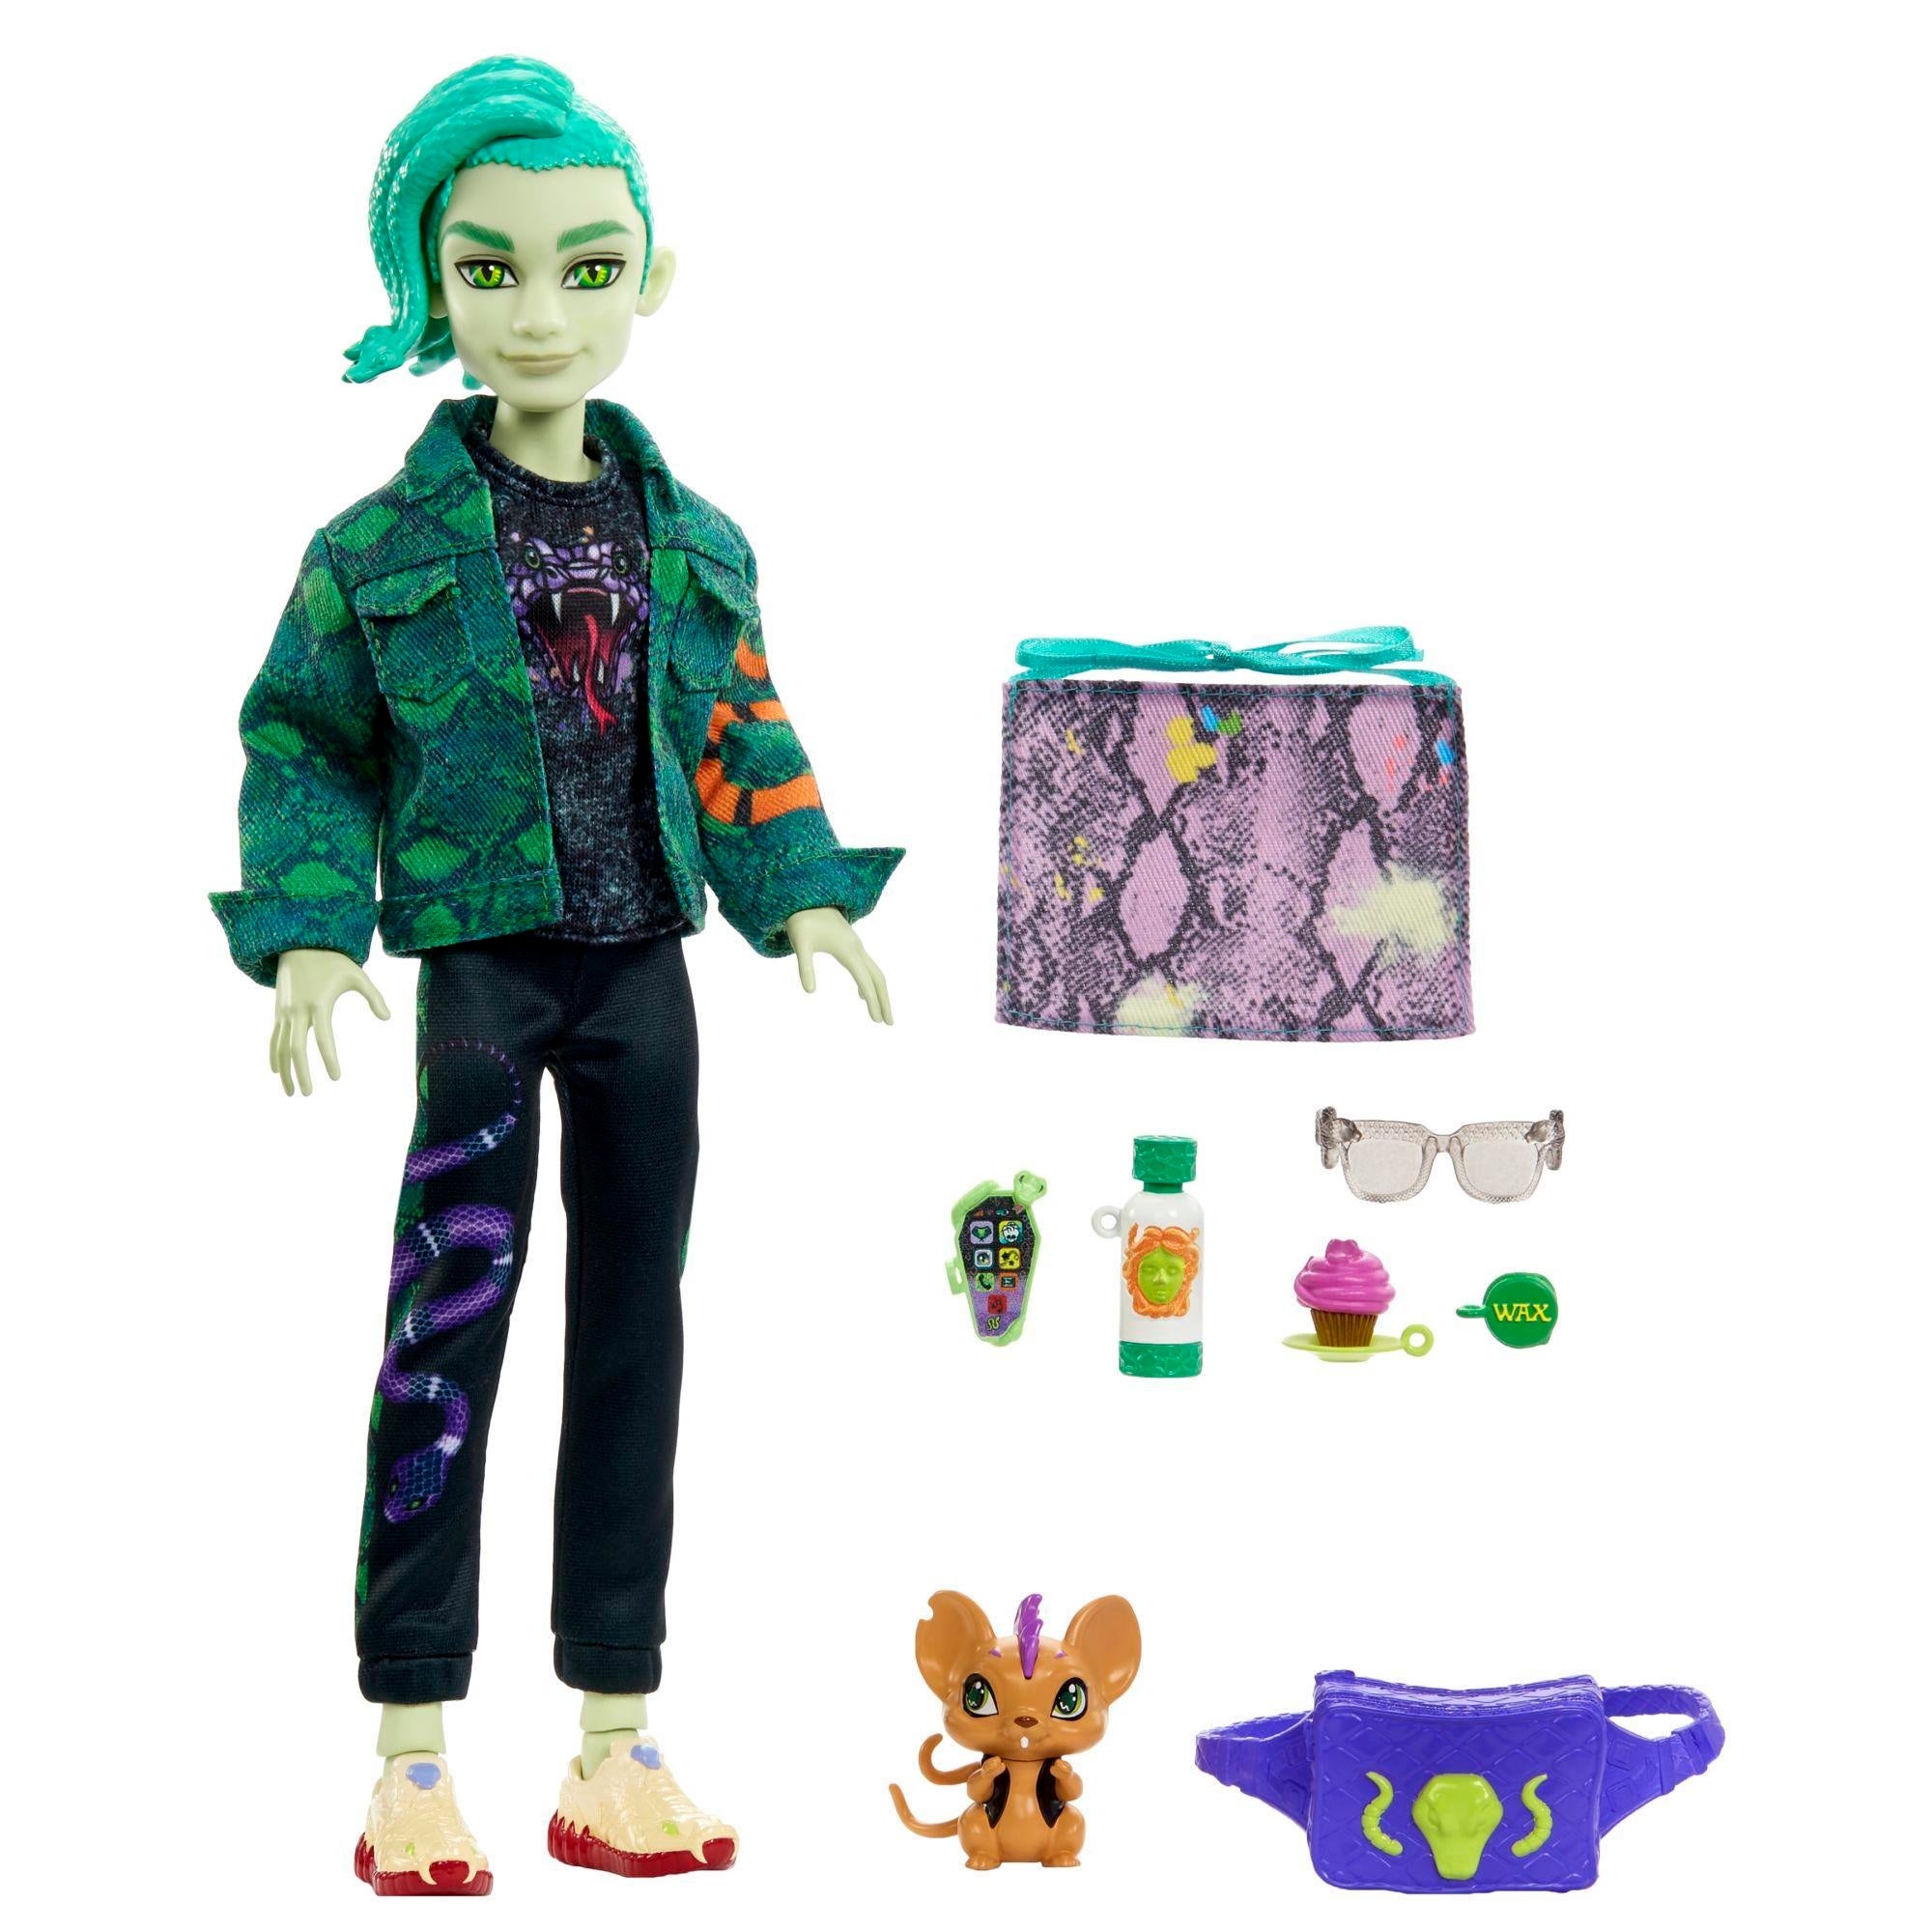 Monster High Hissfits 3 pack dolls set with Purrsephone, Meowlody